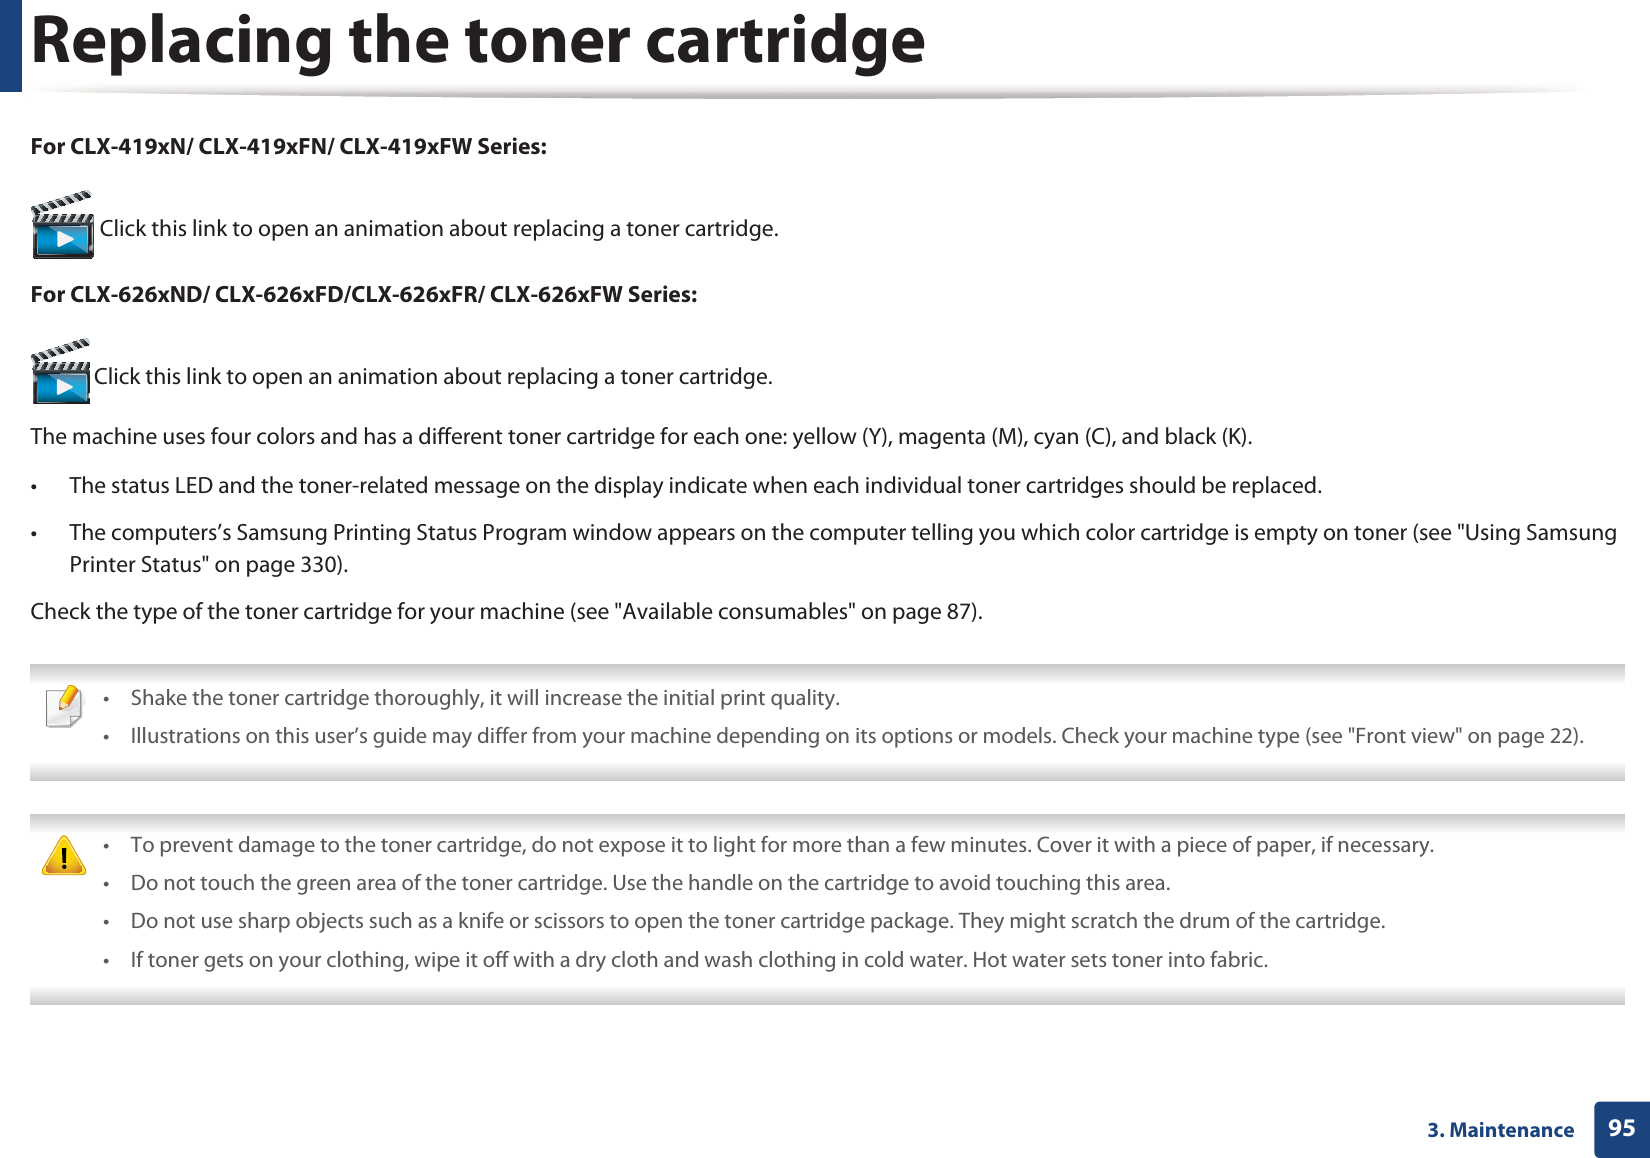 953. MaintenanceReplacing the toner cartridgeFor CLX-419xN/ CLX-419xFN/ CLX-419xFW Series:  Click this link to open an animation about replacing a toner cartridge.For CLX-626xND/ CLX-626xFD/CLX-626xFR/ CLX-626xFW Series:  Click this link to open an animation about replacing a toner cartridge.The machine uses four colors and has a different toner cartridge for each one: yellow (Y), magenta (M), cyan (C), and black (K).• The status LED and the toner-related message on the display indicate when each individual toner cartridges should be replaced.• The computers’s Samsung Printing Status Program window appears on the computer telling you which color cartridge is empty on toner (see &quot;Using Samsung Printer Status&quot; on page 330).Check the type of the toner cartridge for your machine (see &quot;Available consumables&quot; on page 87). • Shake the toner cartridge thoroughly, it will increase the initial print quality.• Illustrations on this user’s guide may differ from your machine depending on its options or models. Check your machine type (see &quot;Front view&quot; on page 22).  • To prevent damage to the toner cartridge, do not expose it to light for more than a few minutes. Cover it with a piece of paper, if necessary. • Do not touch the green area of the toner cartridge. Use the handle on the cartridge to avoid touching this area. • Do not use sharp objects such as a knife or scissors to open the toner cartridge package. They might scratch the drum of the cartridge.• If toner gets on your clothing, wipe it off with a dry cloth and wash clothing in cold water. Hot water sets toner into fabric. 